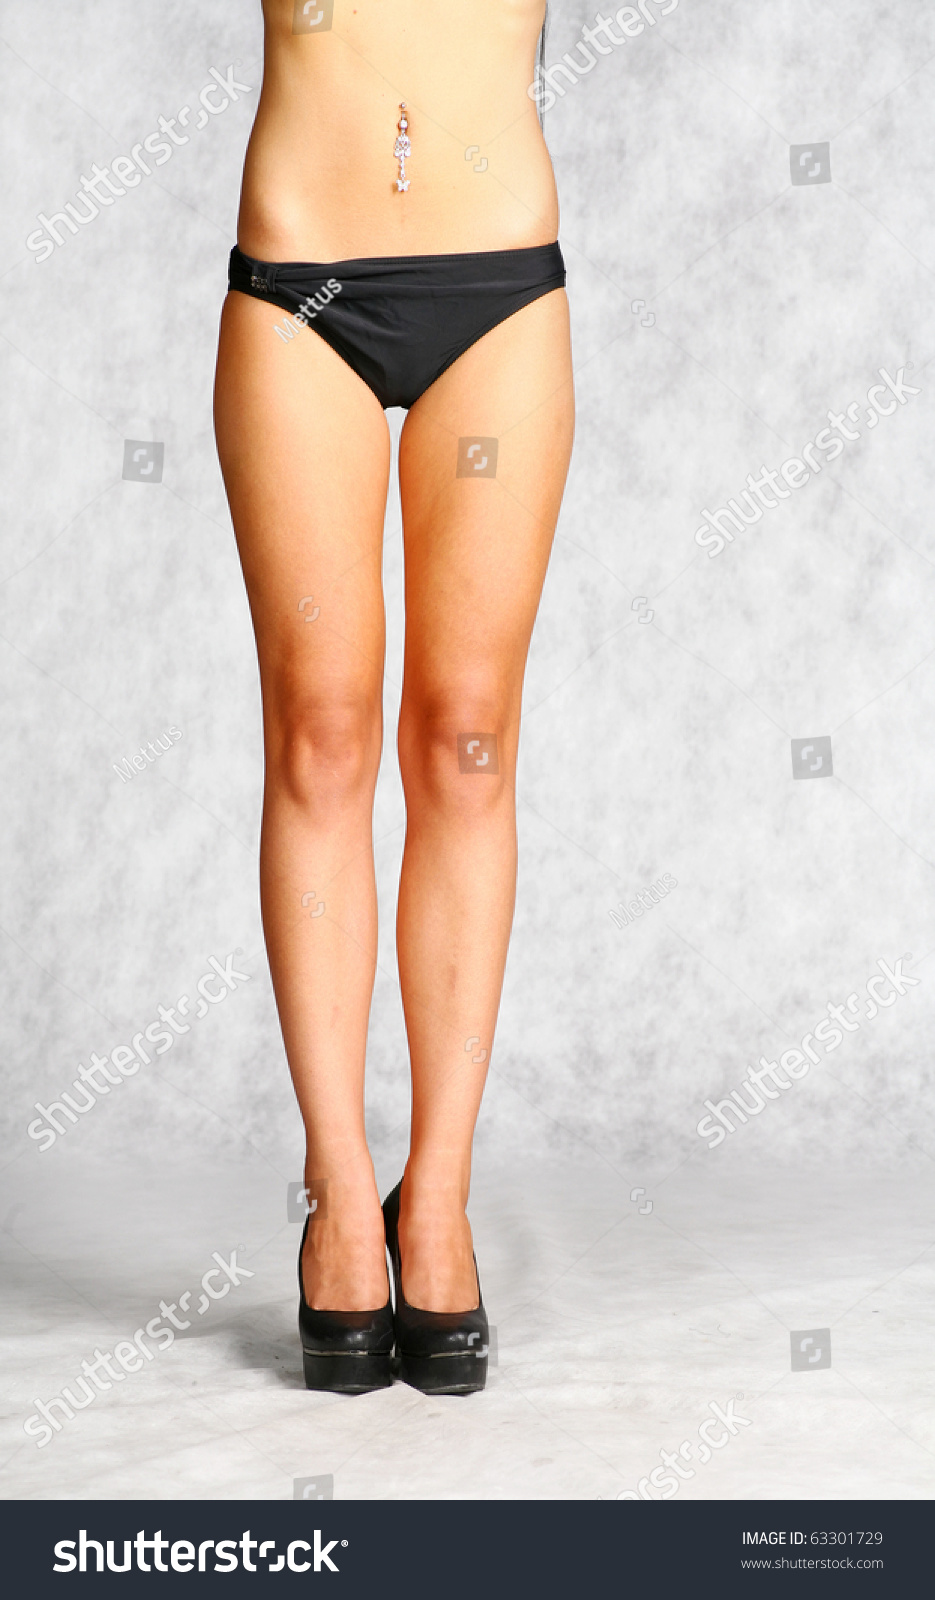 Download Front Side Legs Sexy Girl Black Stock Photo 63301729 ...